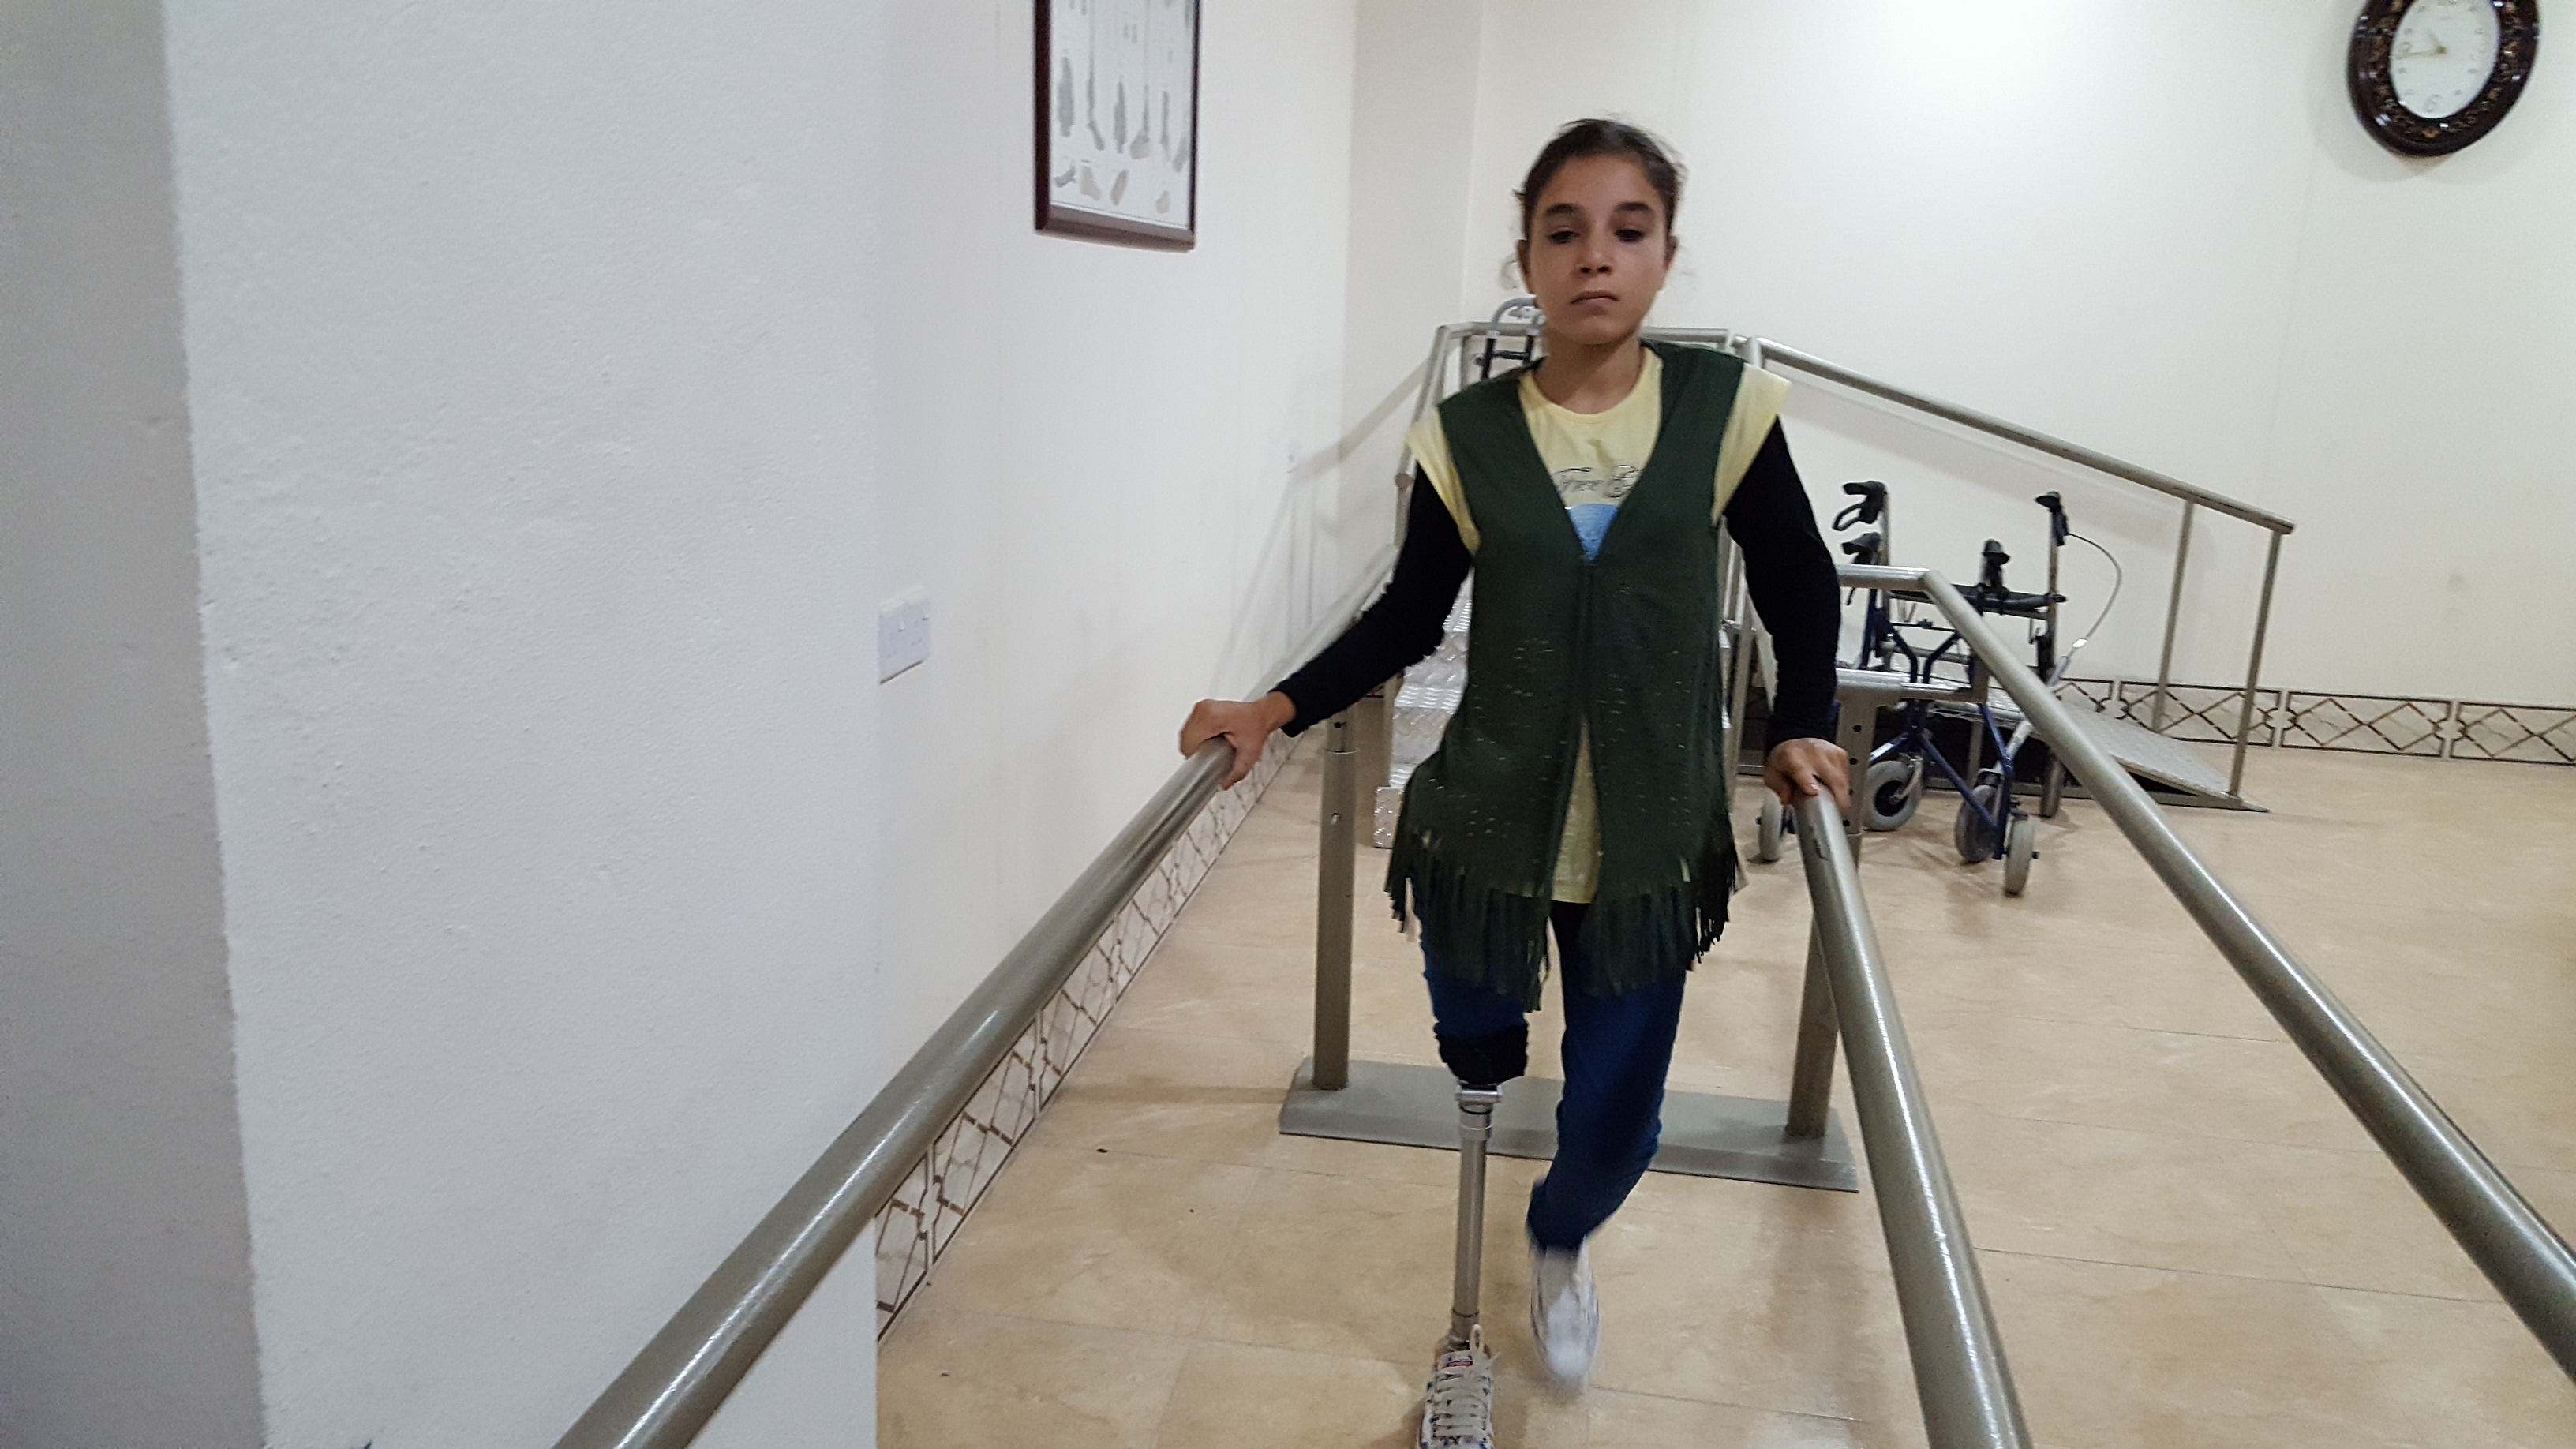 Kuwait adopts treating 180 Mosul's civilians with artificial limbs